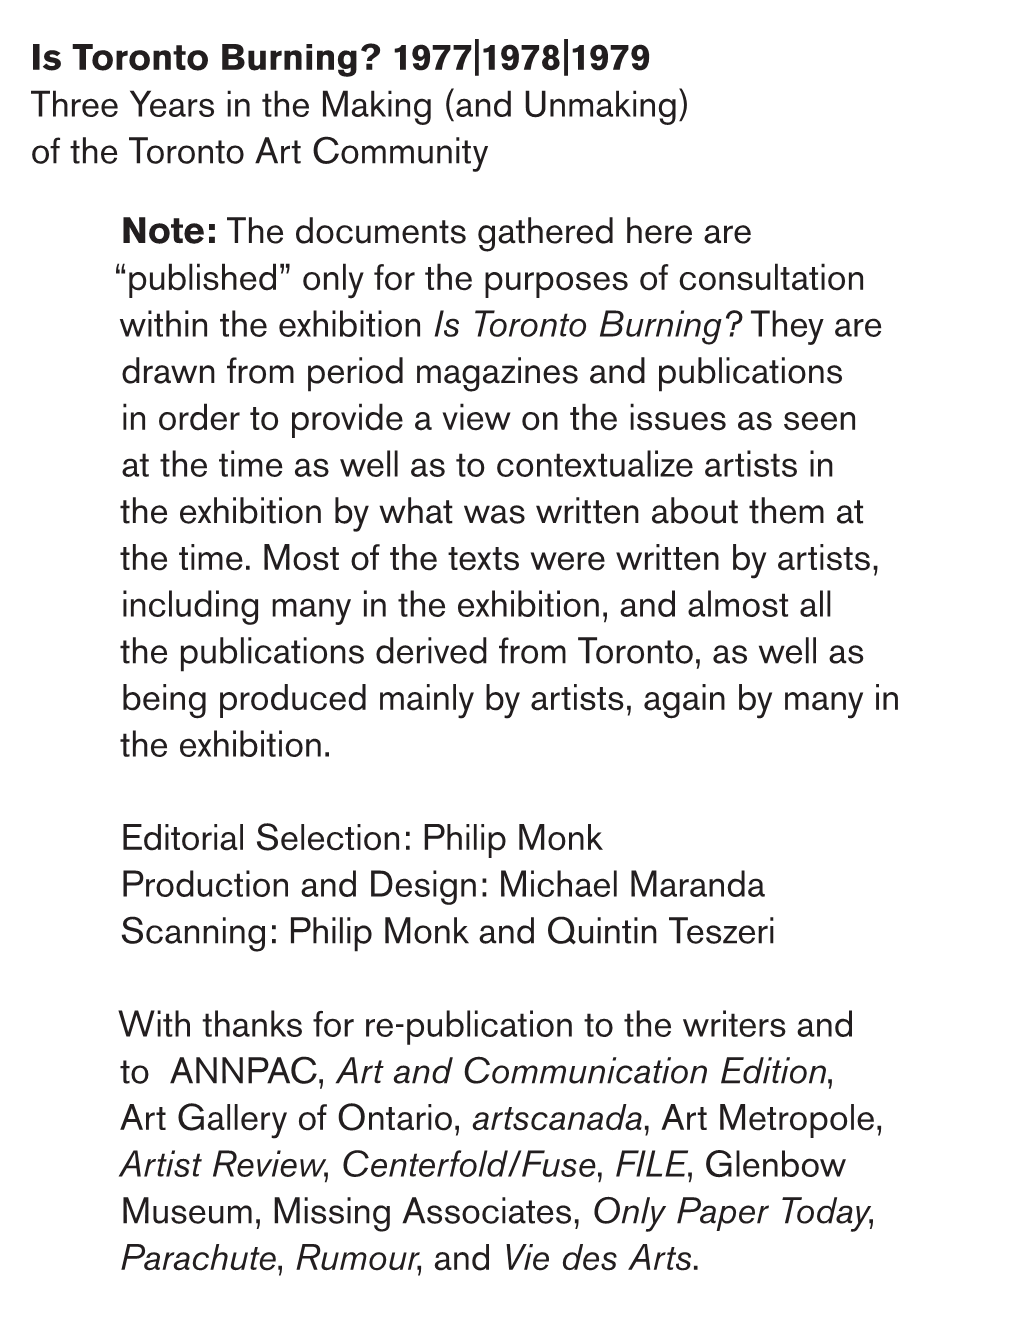 Is Toronto Burning? 1977|1978|1979 Three Years in the Making (And Unmaking) of the Toronto Art Community